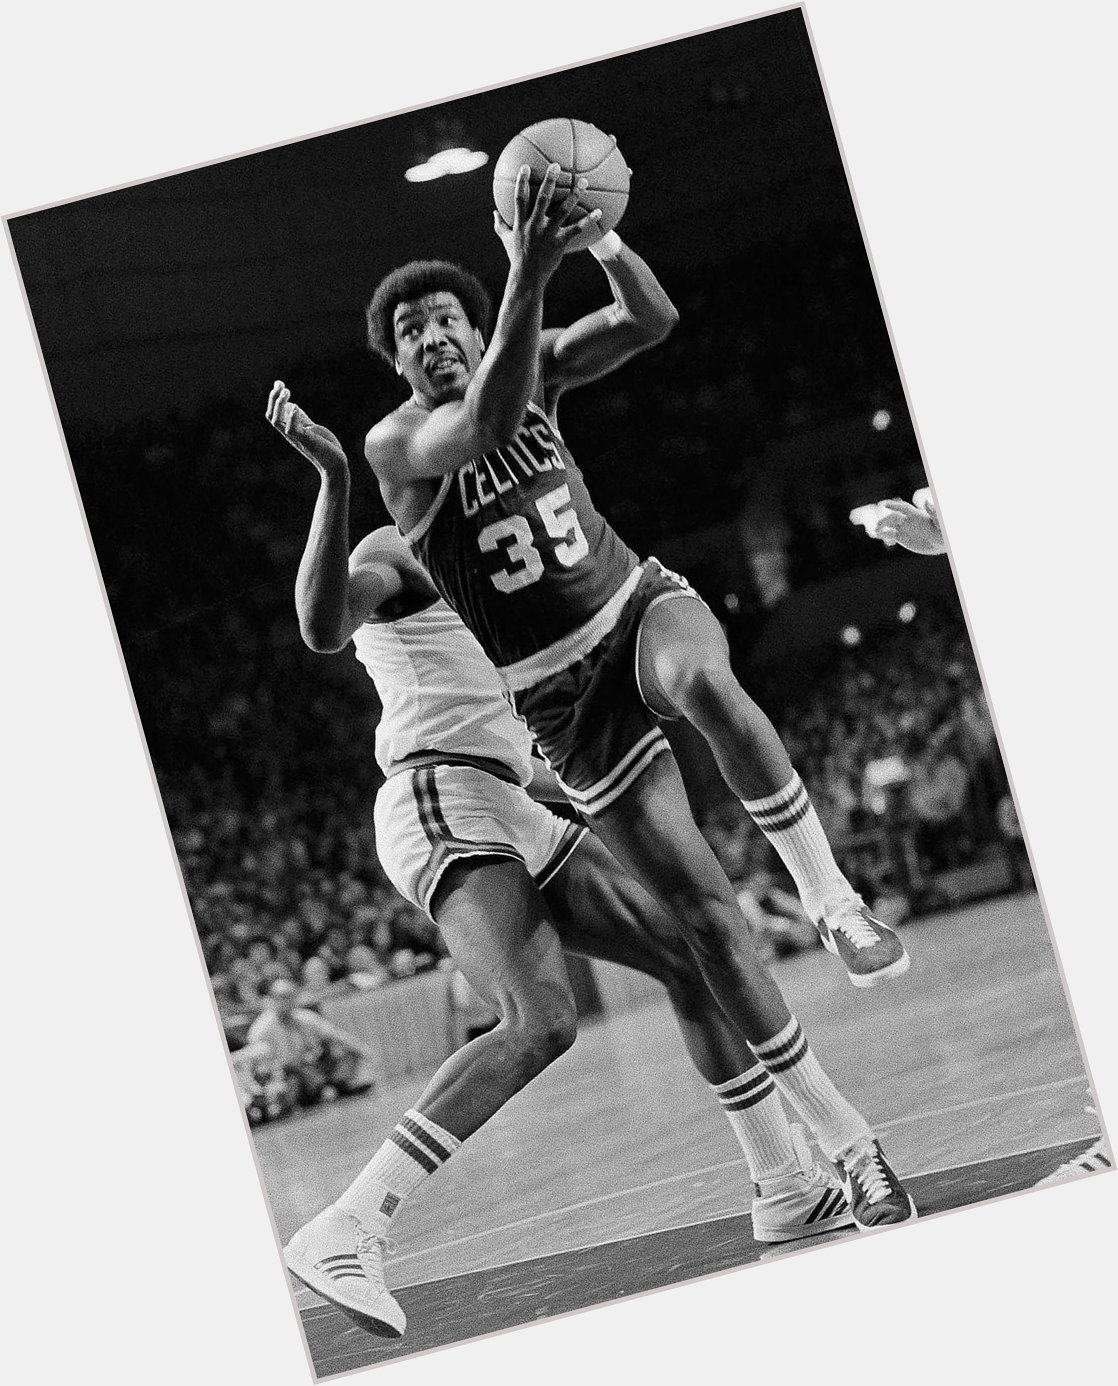 Happy Birthday Paul Silas, who was born on July 12, 1943

Sports history July:  